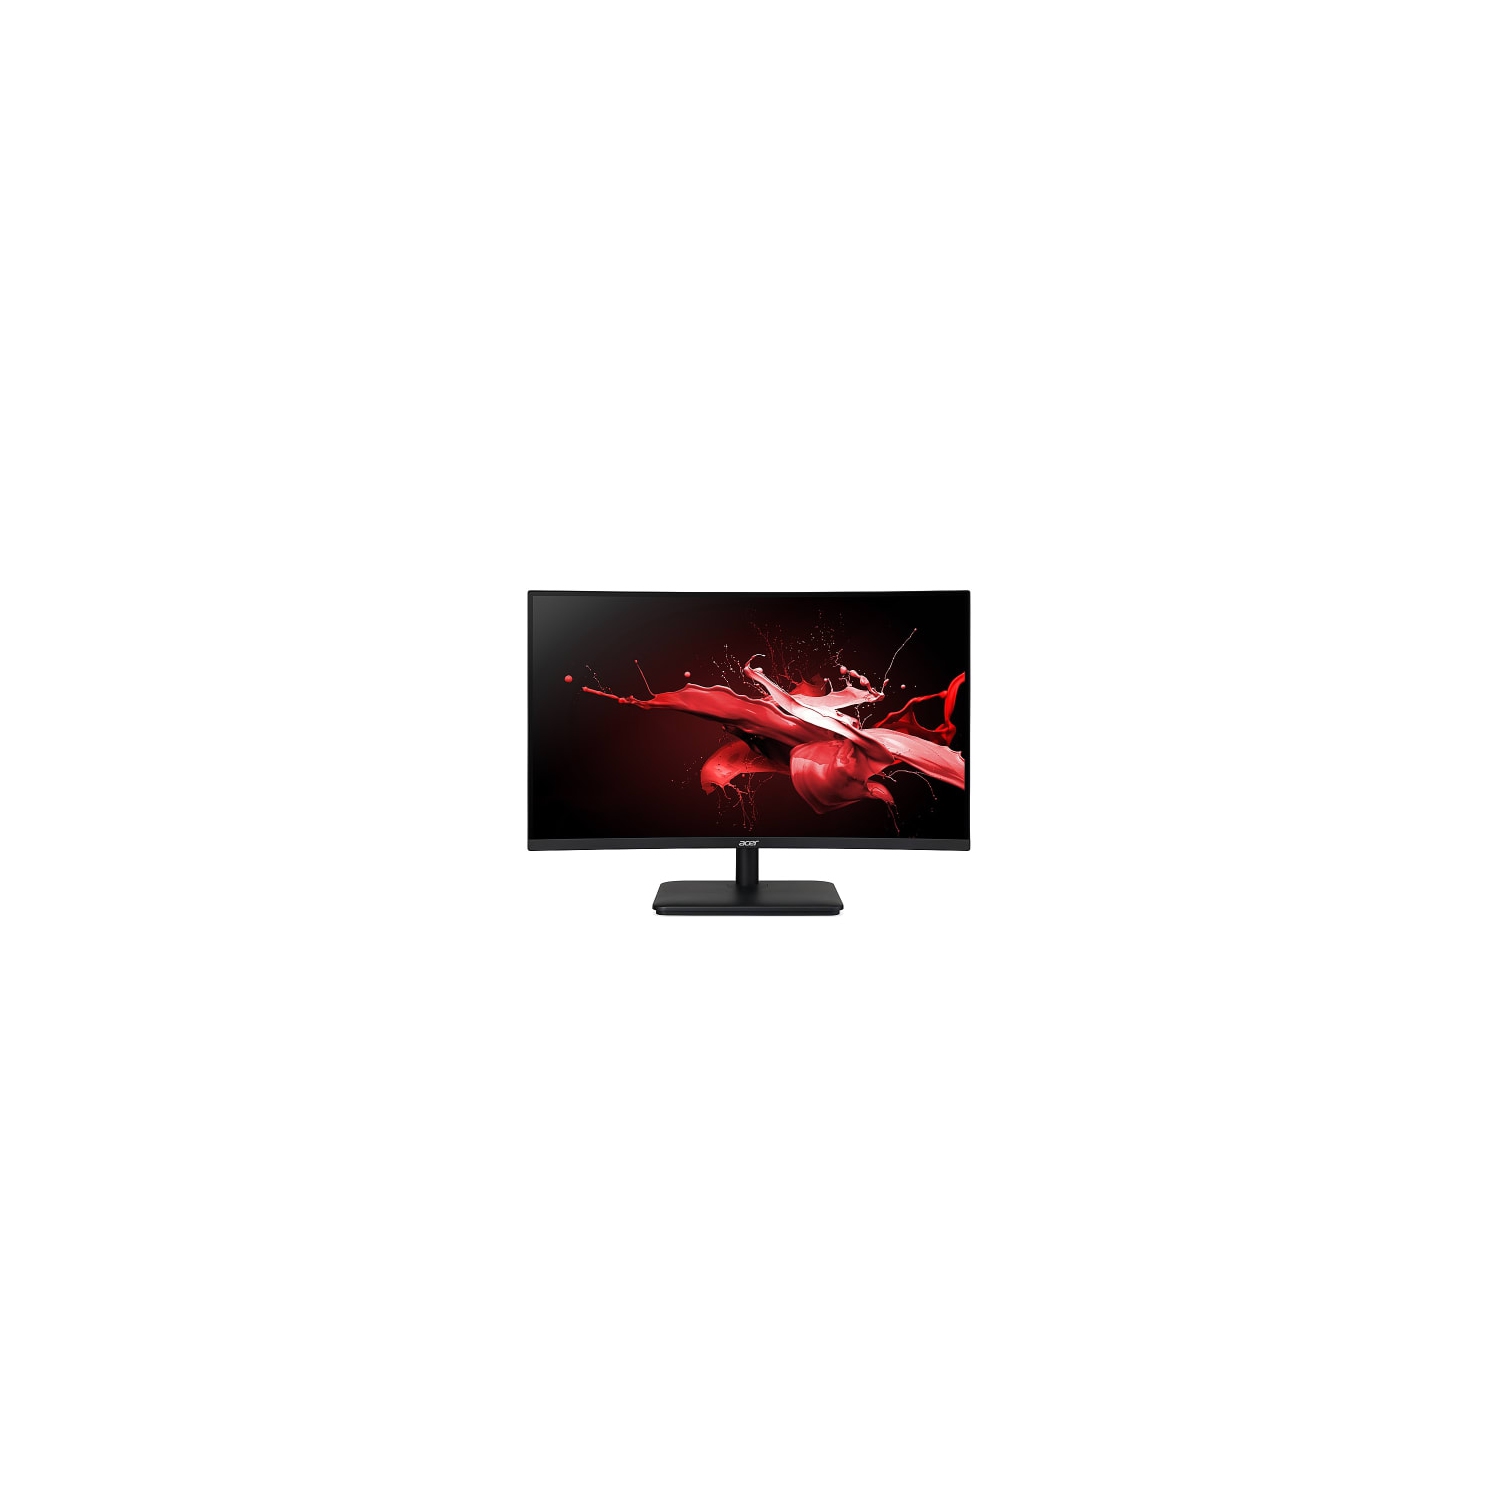 Acer ED270R Sbiipx 27" LCD FHD 165Hz AMD FreeSync HDMI Black Monitor (UM.HE0AA.S02)